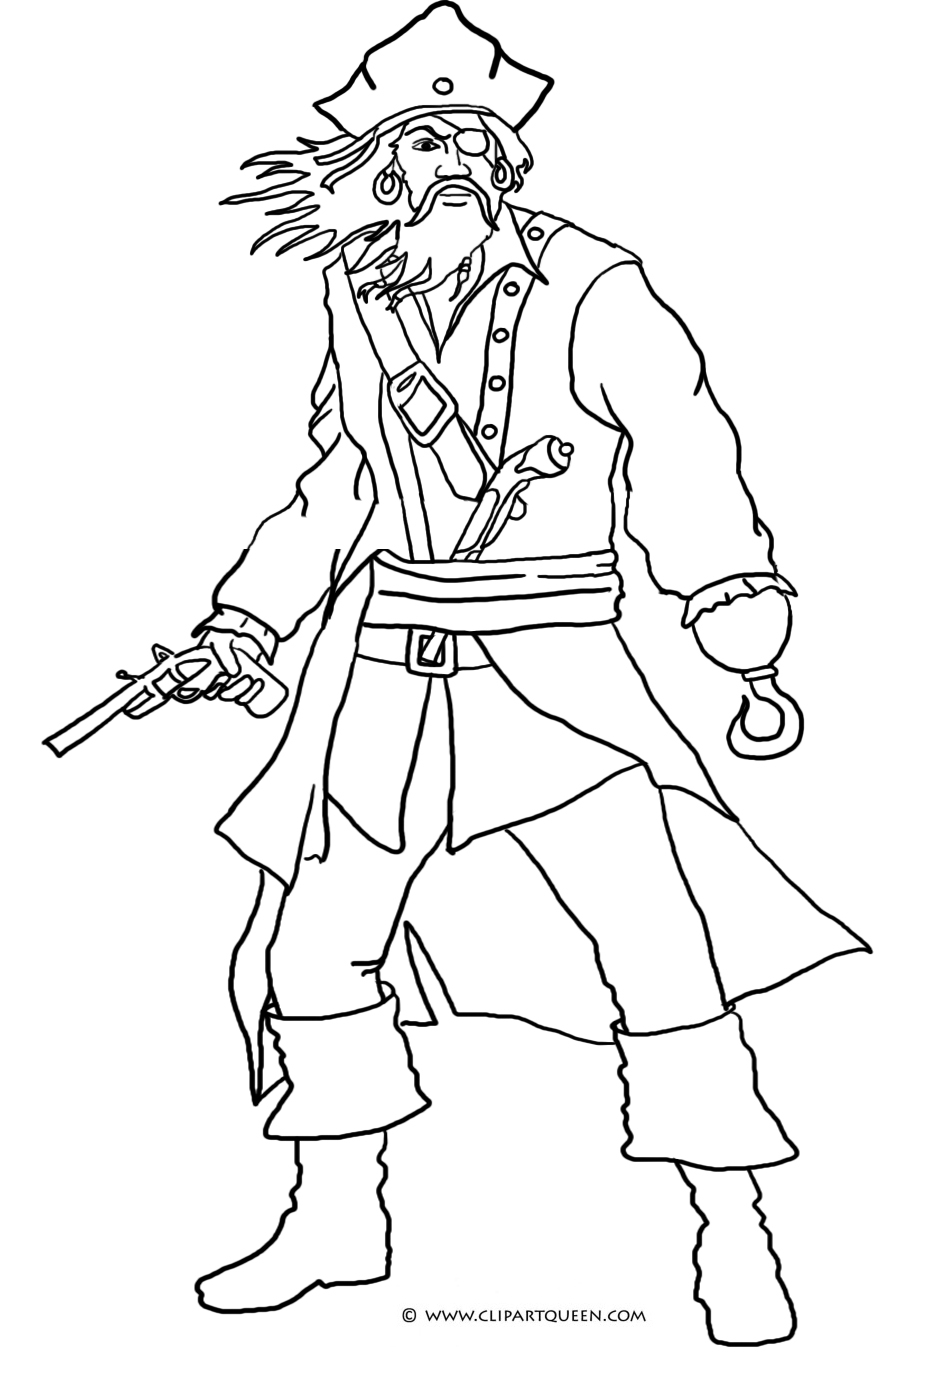 Pirate coloring pages.